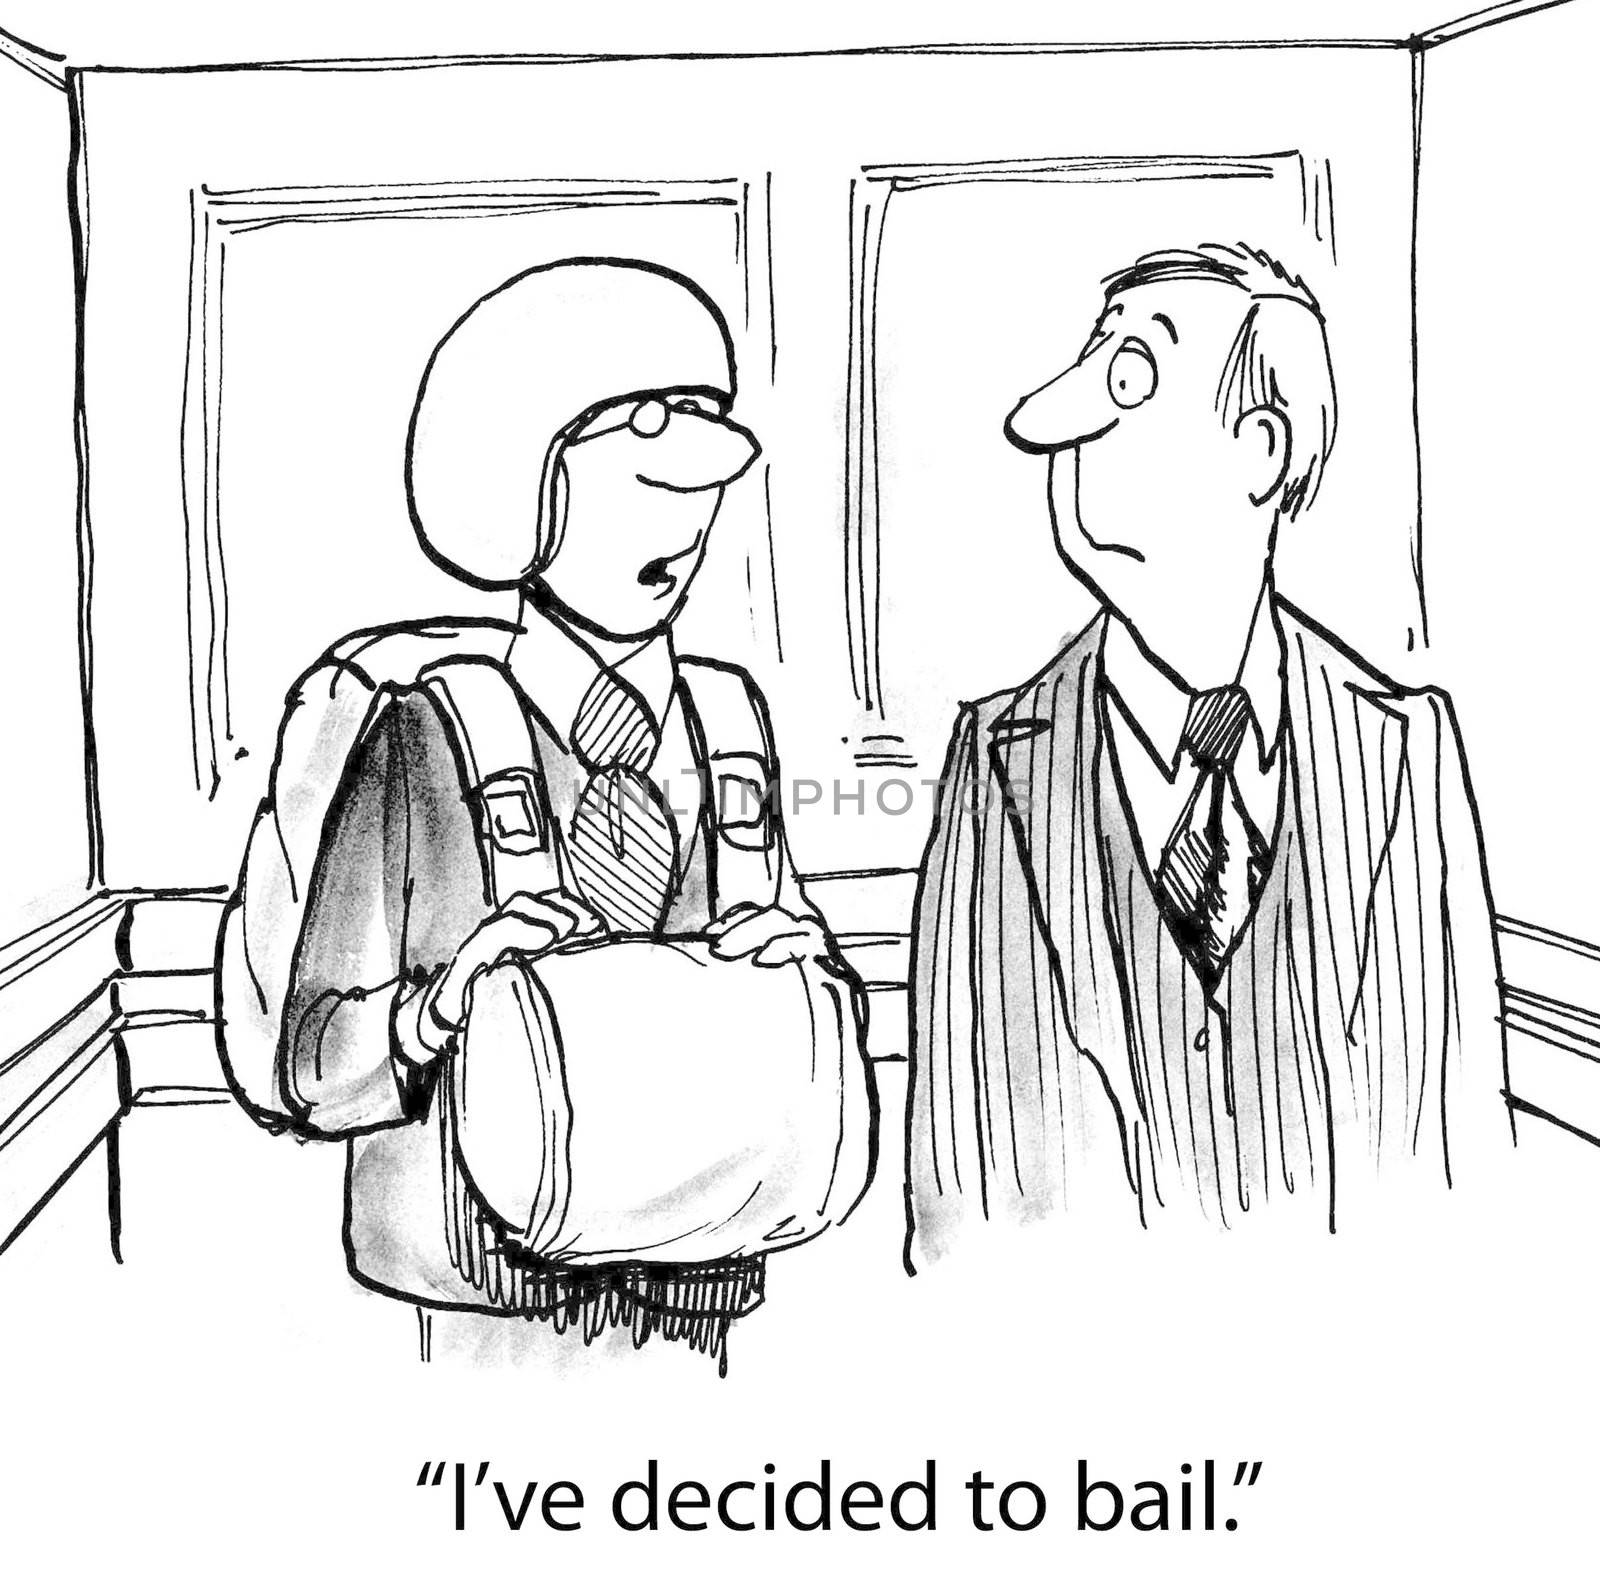 "I've decided to bail."